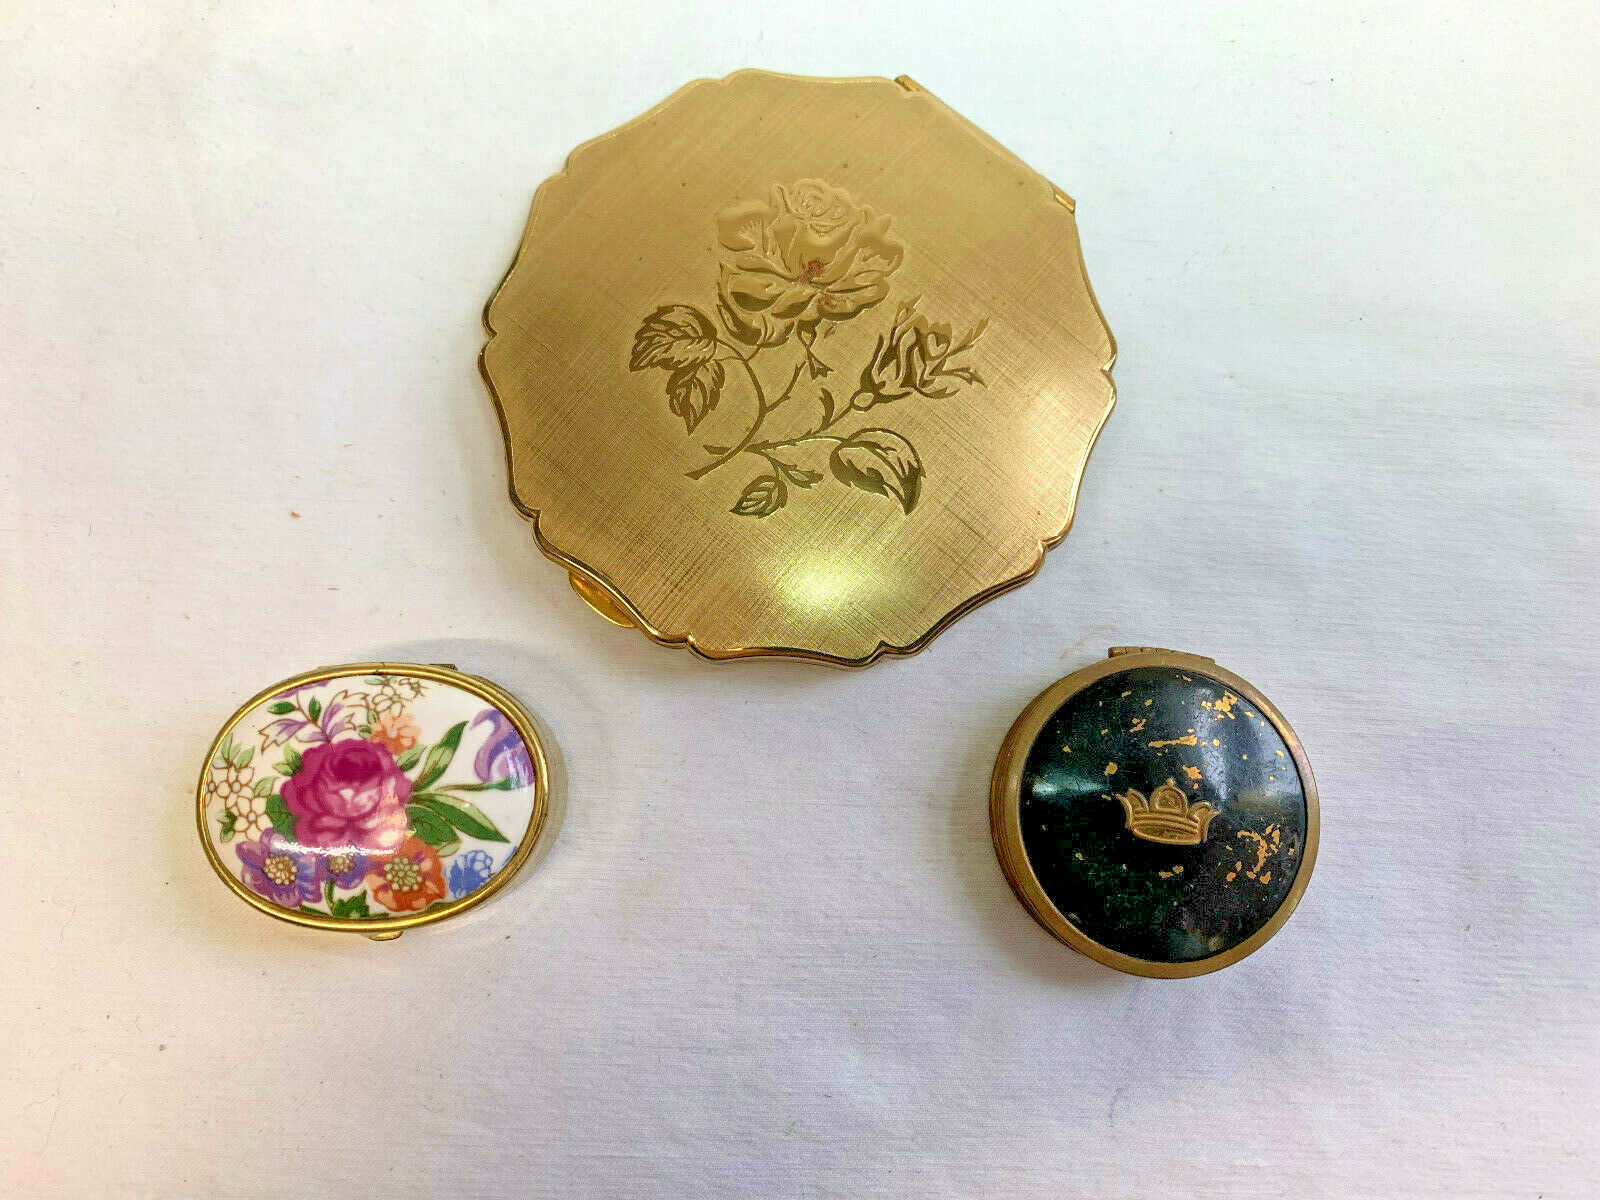 Mixed Lot of 3 Compacts Trinket Pill Box Rose Floral Goldtone Stratton Tussy - $29.95